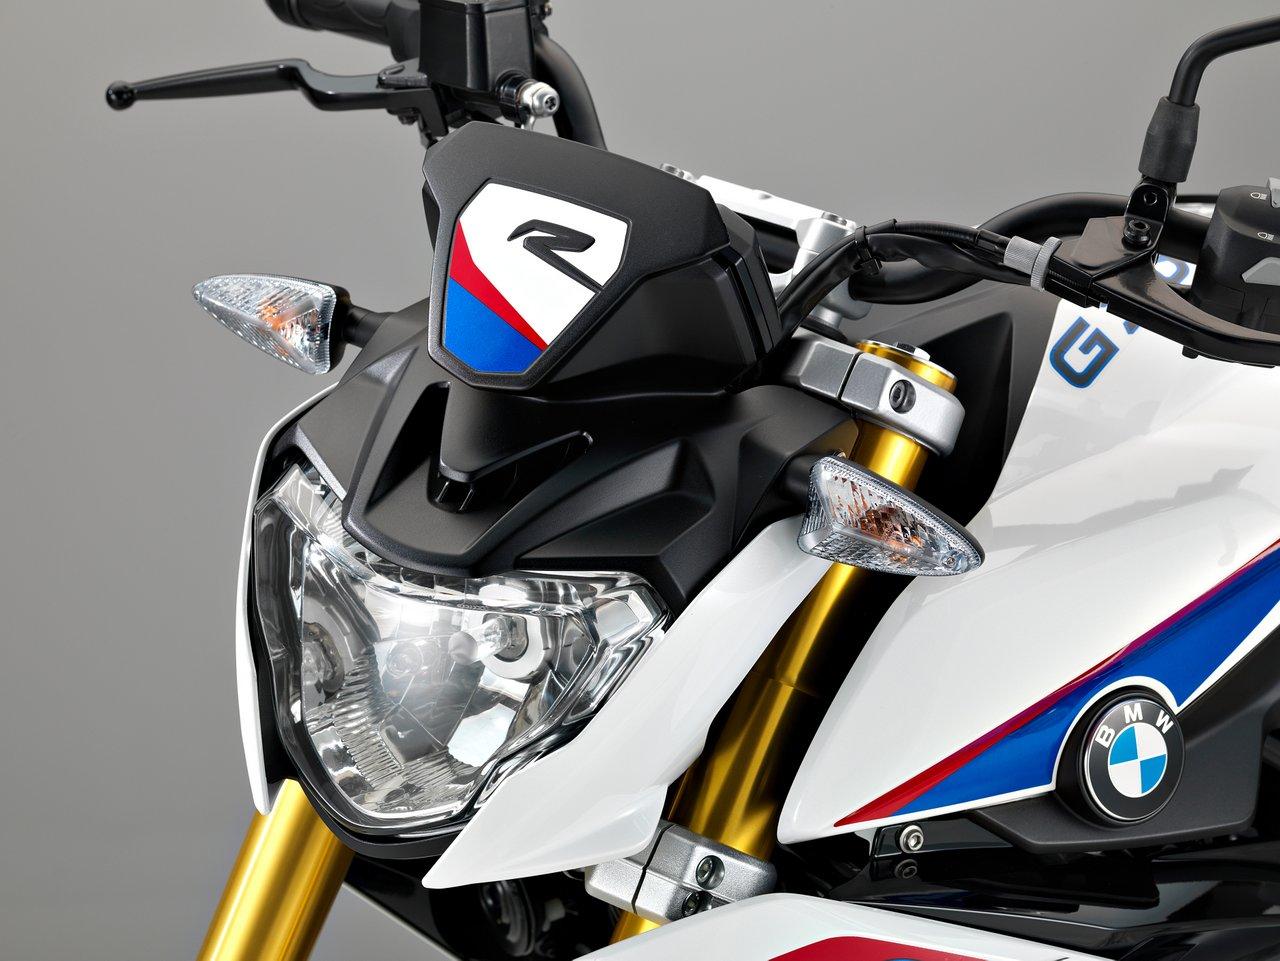 New Image Show The Made In India BMW G310R Up Close